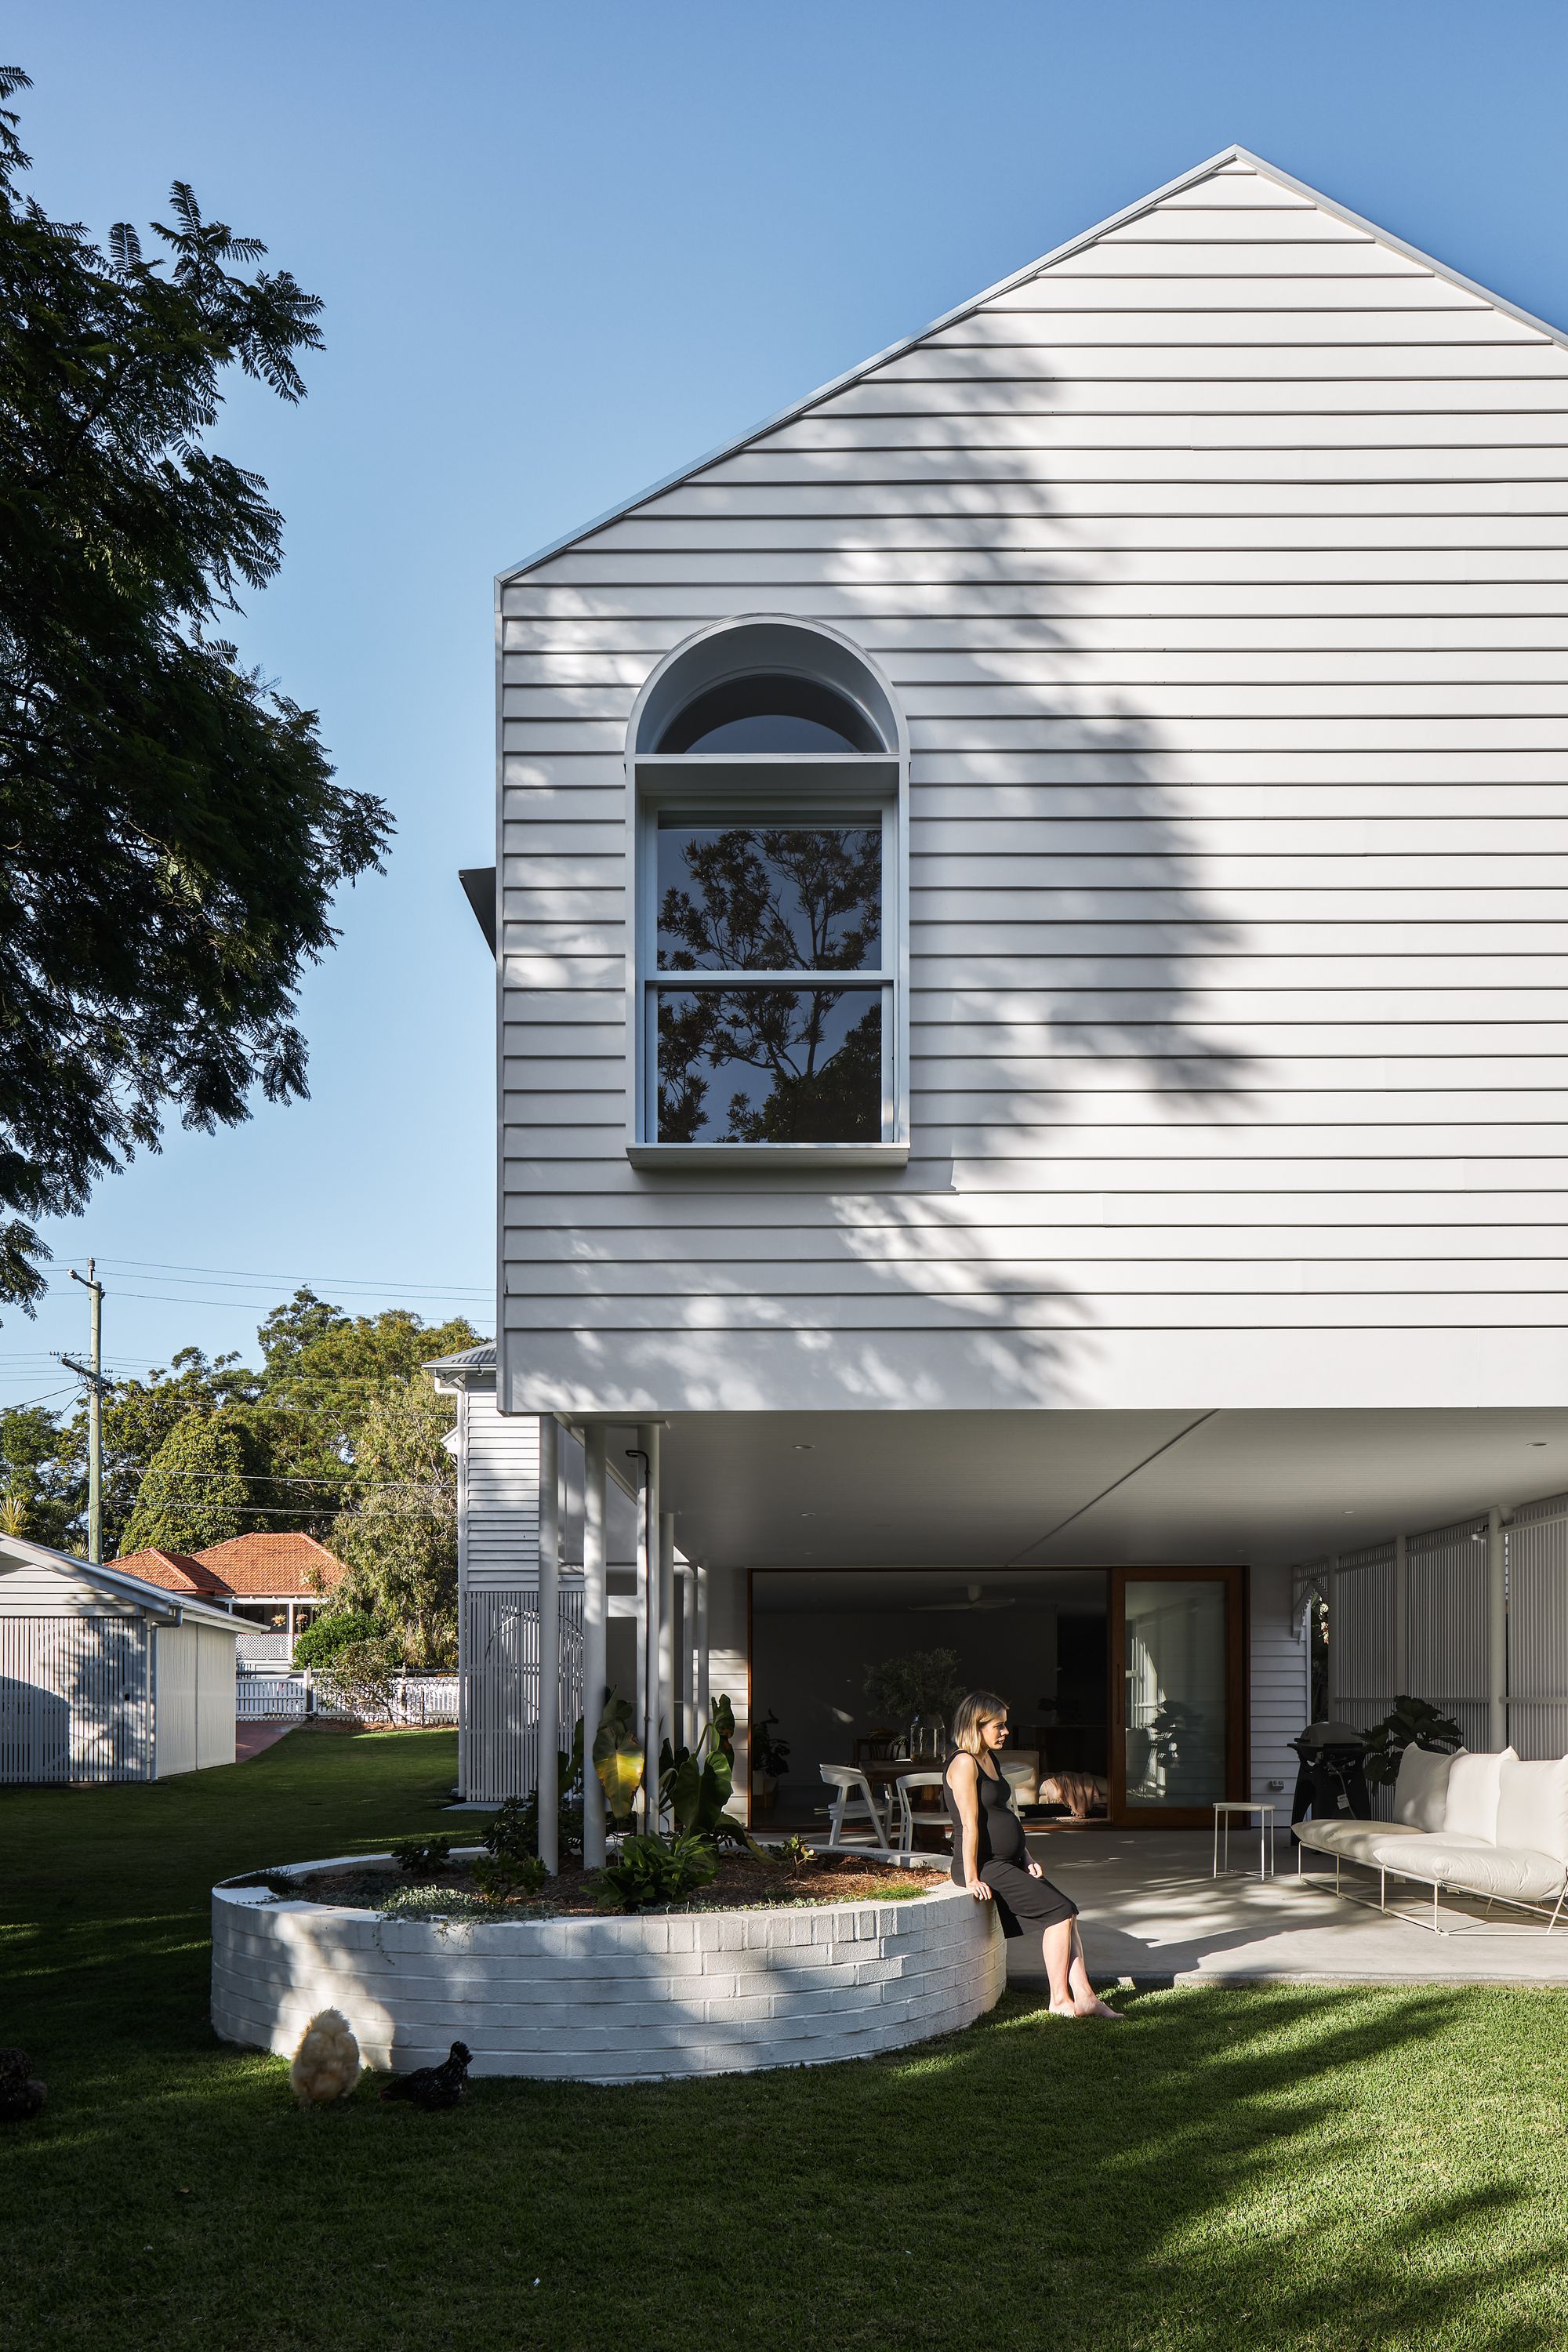 Fuller Street Cottage by DAH Architecture showing rear weatherboard facade